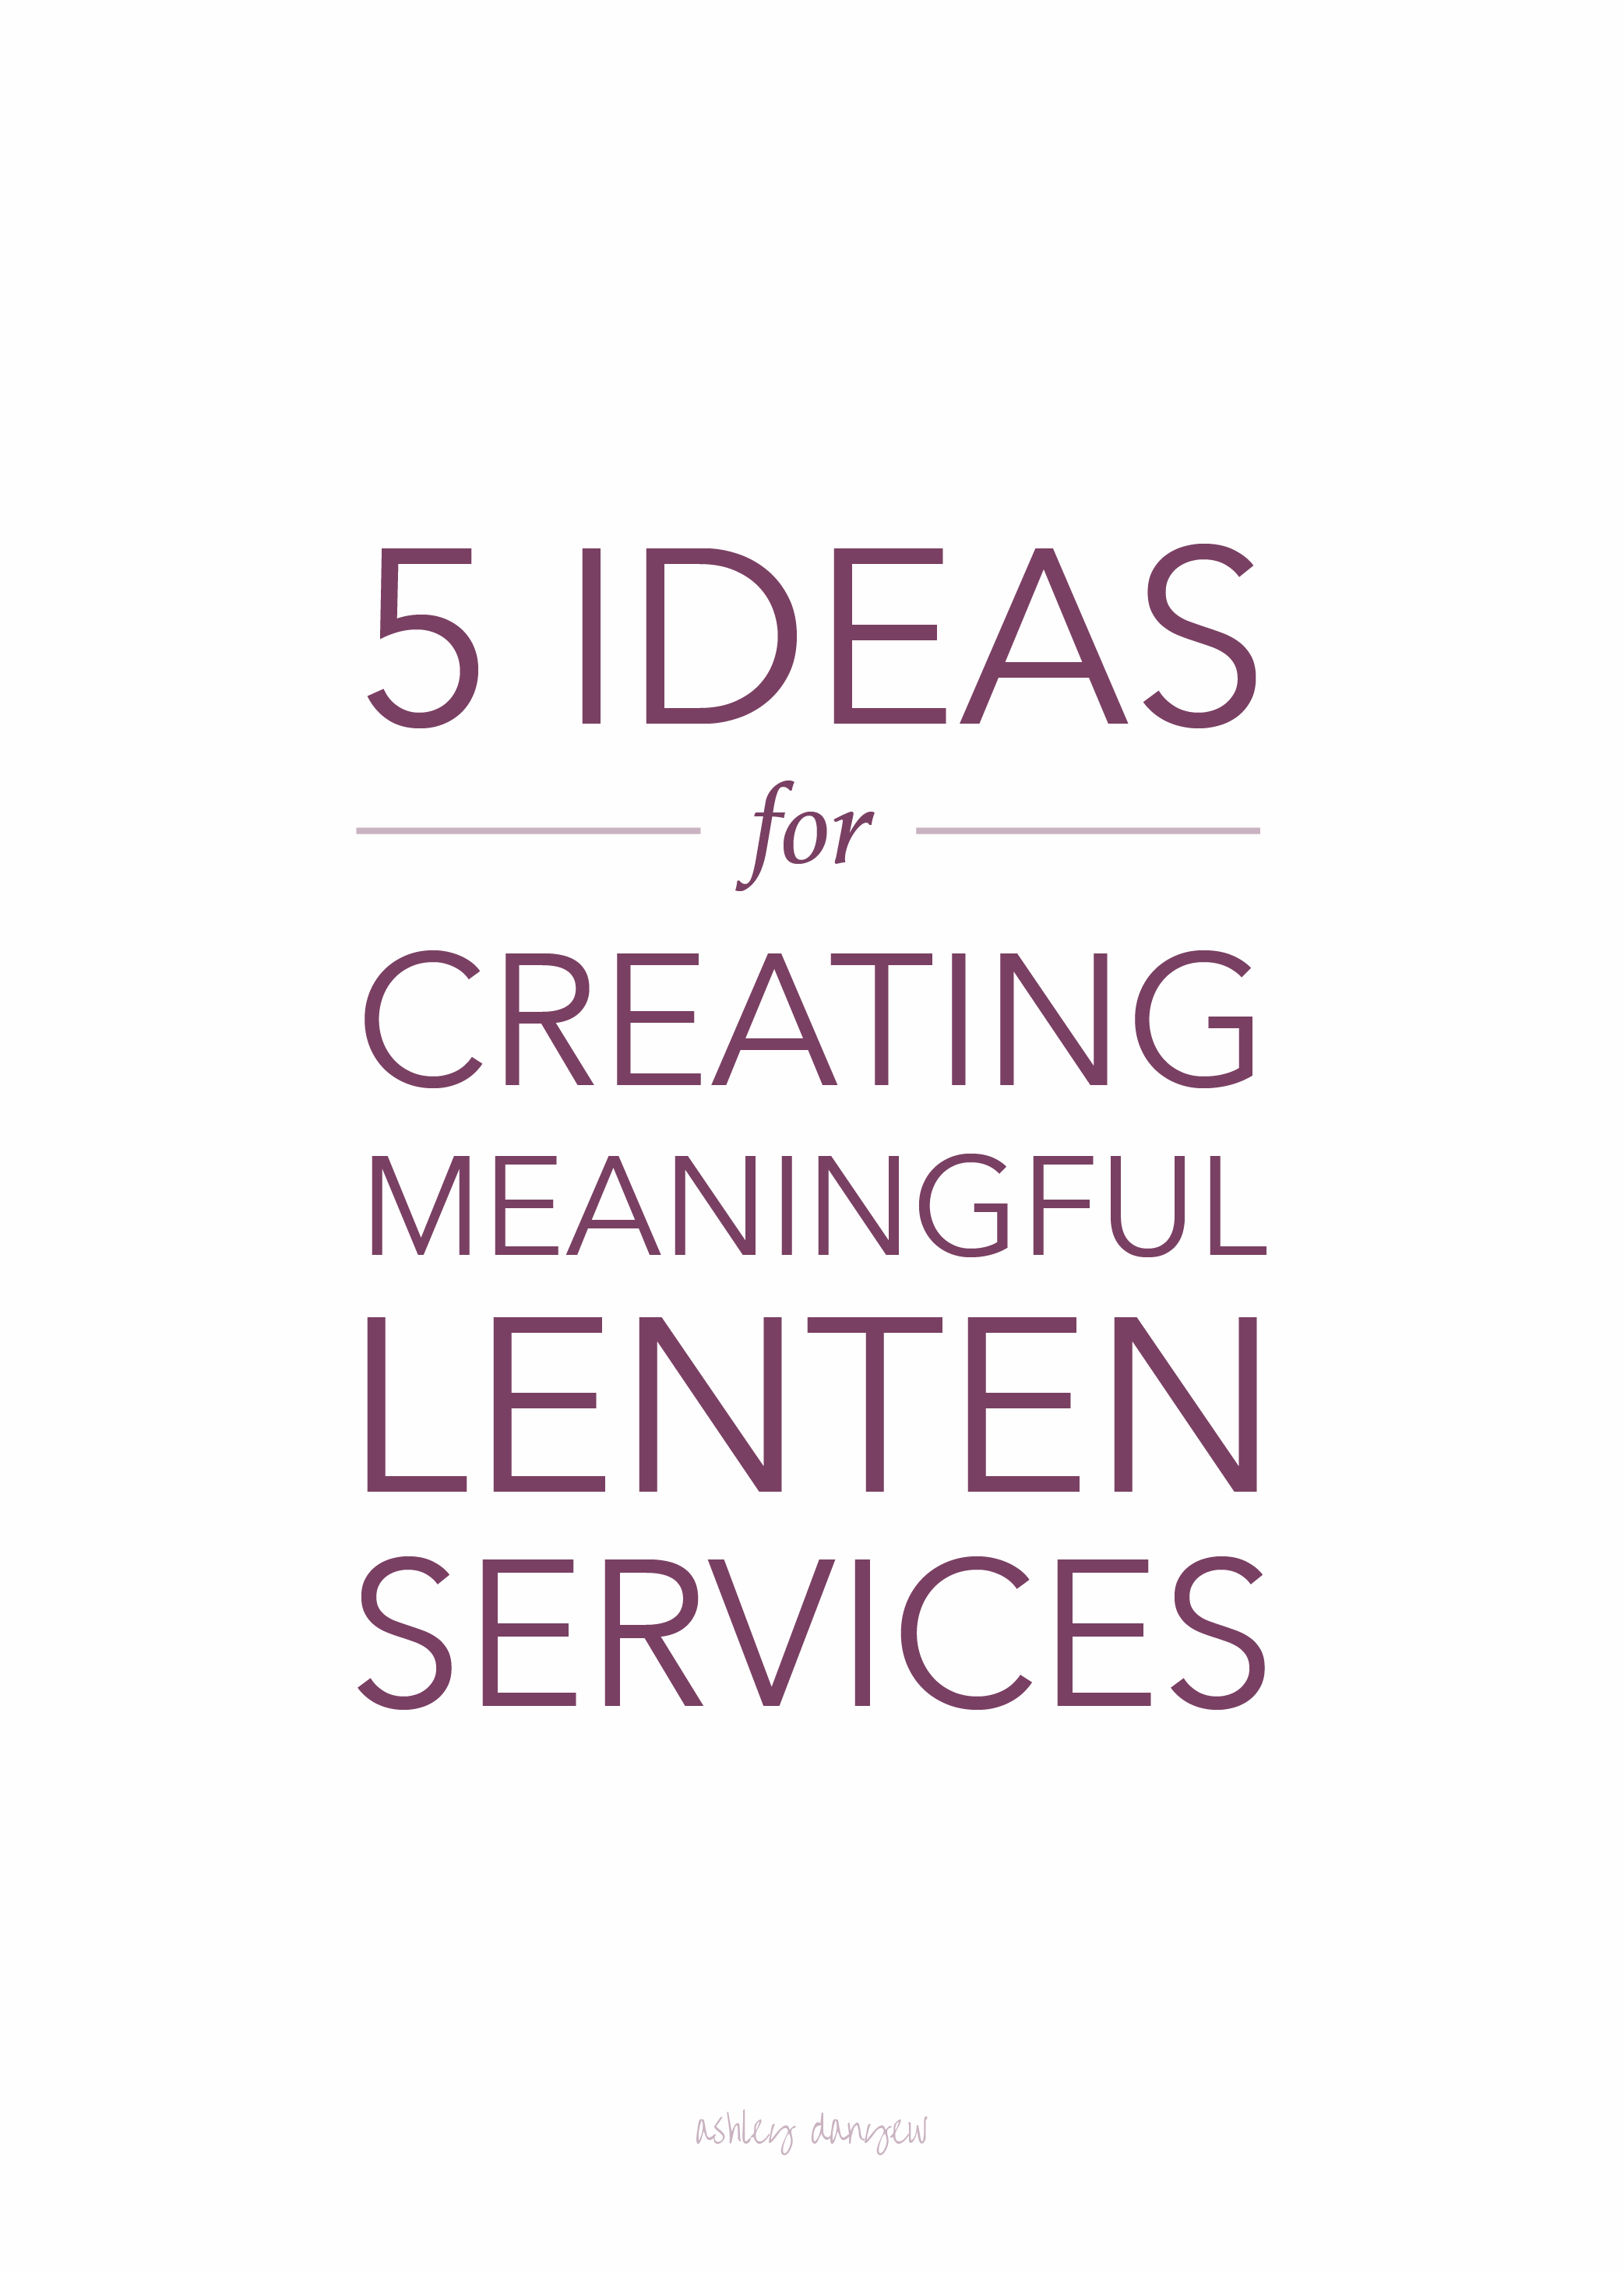 5 Ideas for Creating Meaningful Lenten Services-02.png